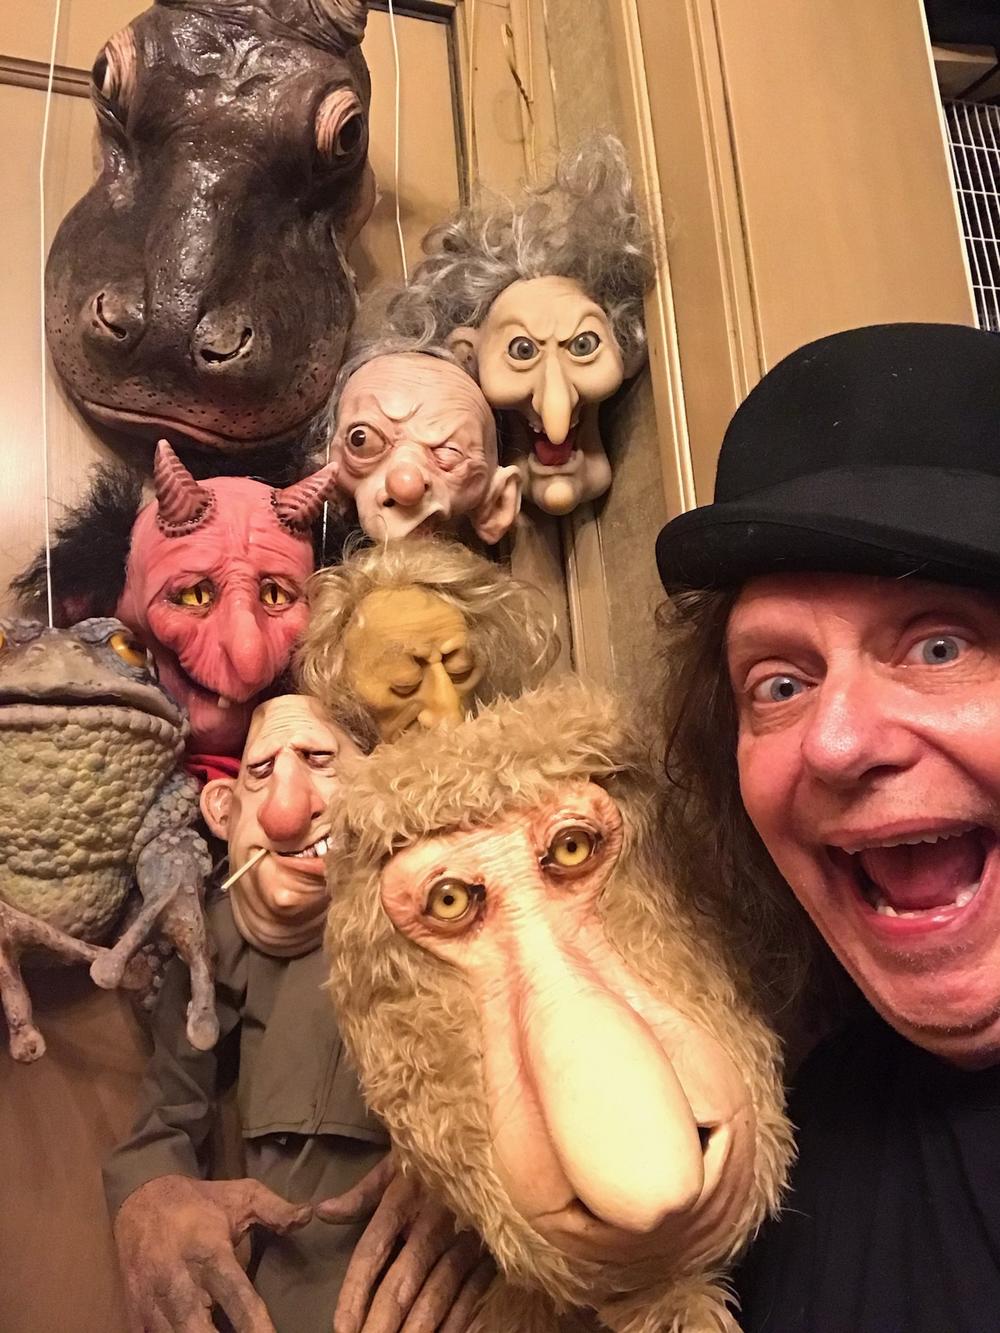 Matthew Owens, founder of the Lockdown Puppet Theater, with his puppets.